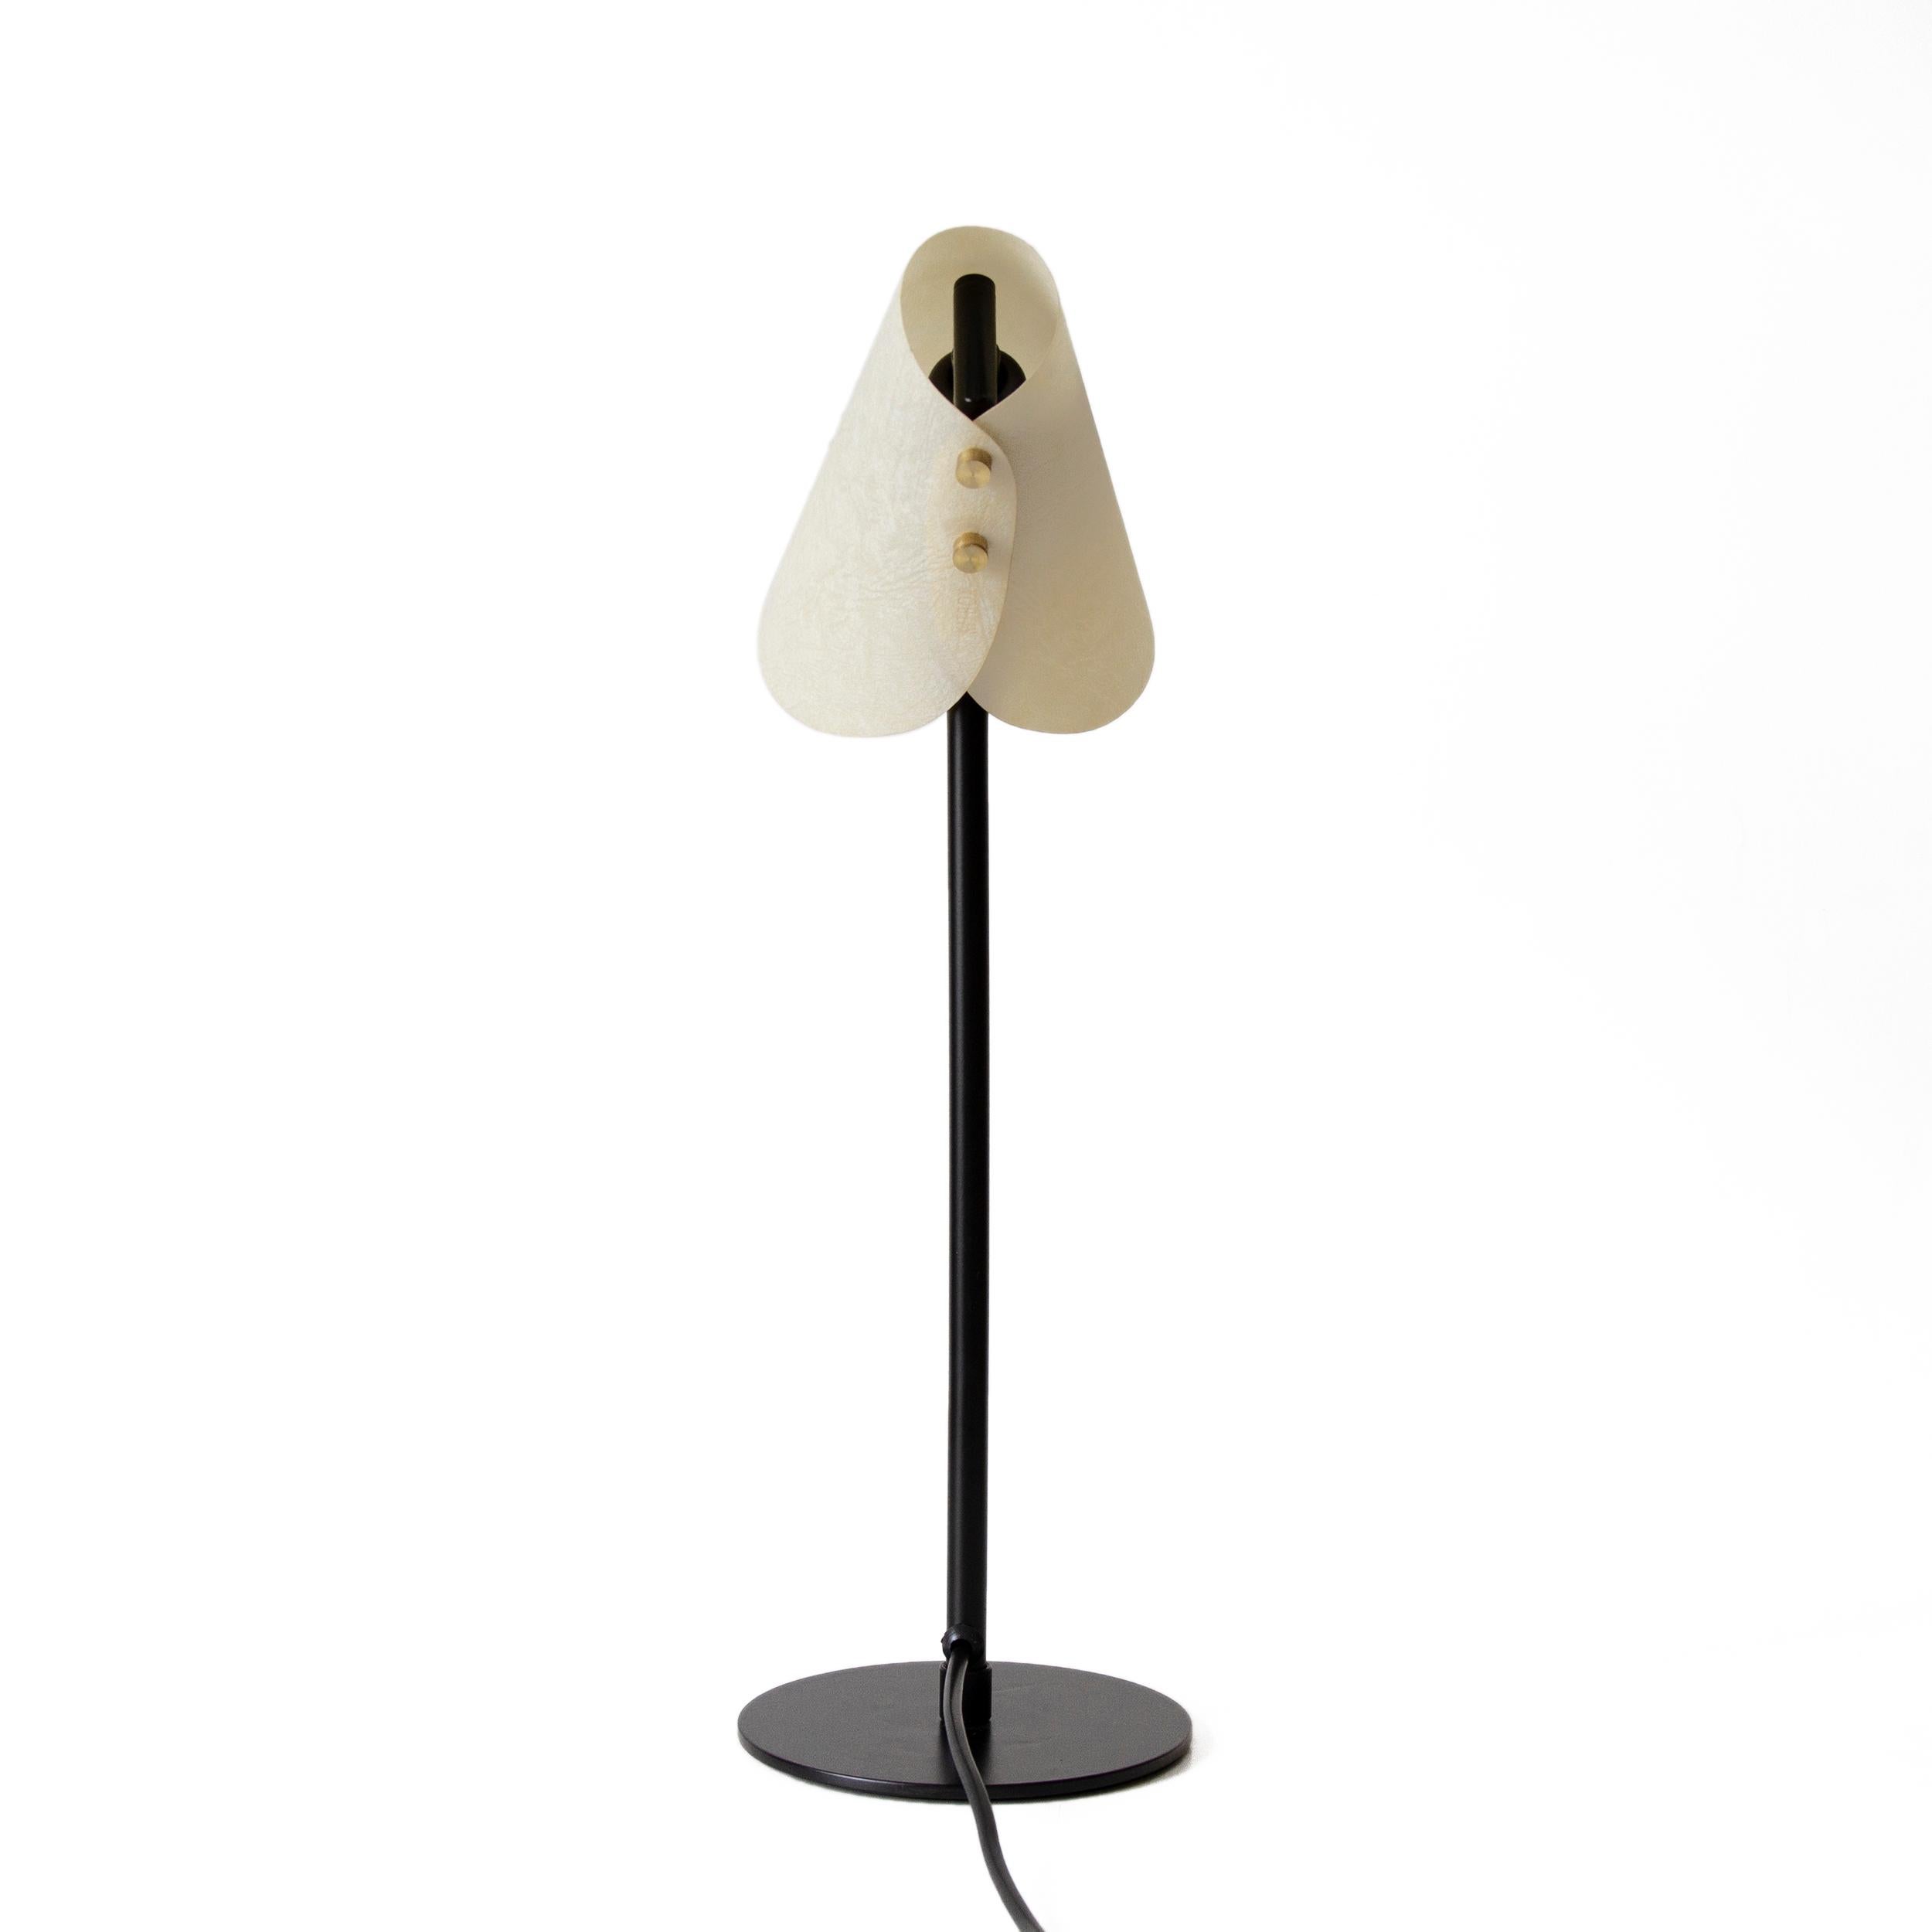 Turkish Metal & Parchment Desk Lamp, Black, June, Inspired by Handmaid's Tale For Sale